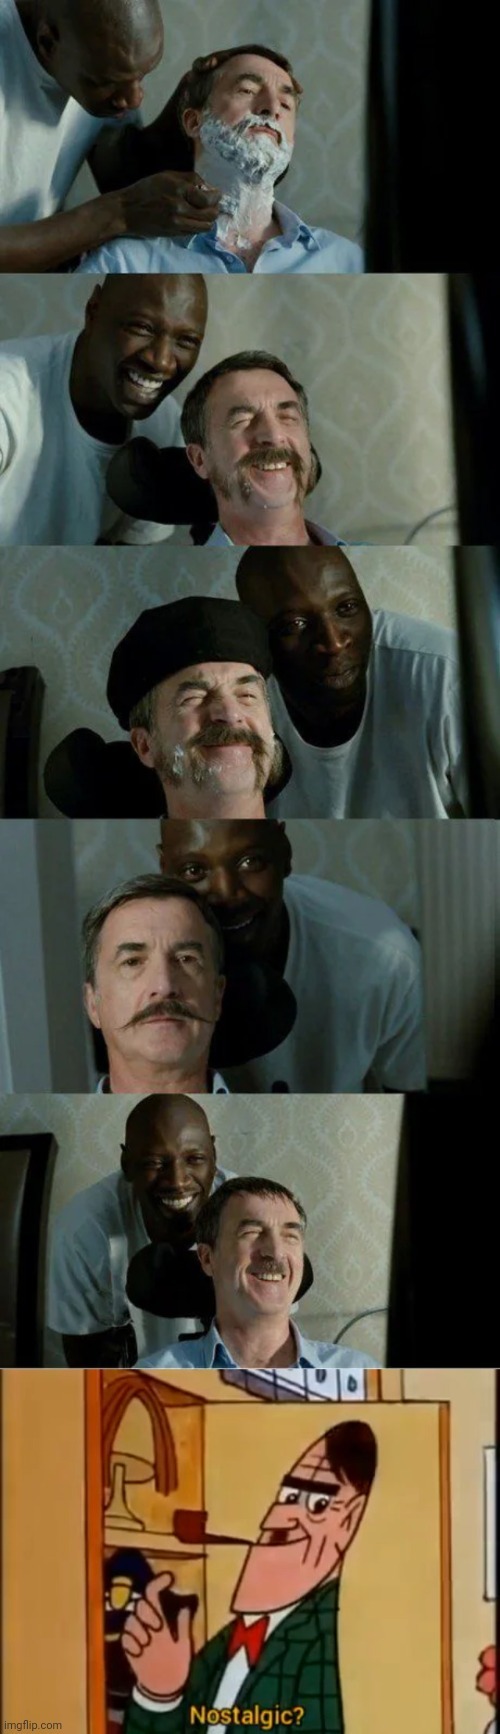 Wholesome (Sauce: The Intouchables) - meme